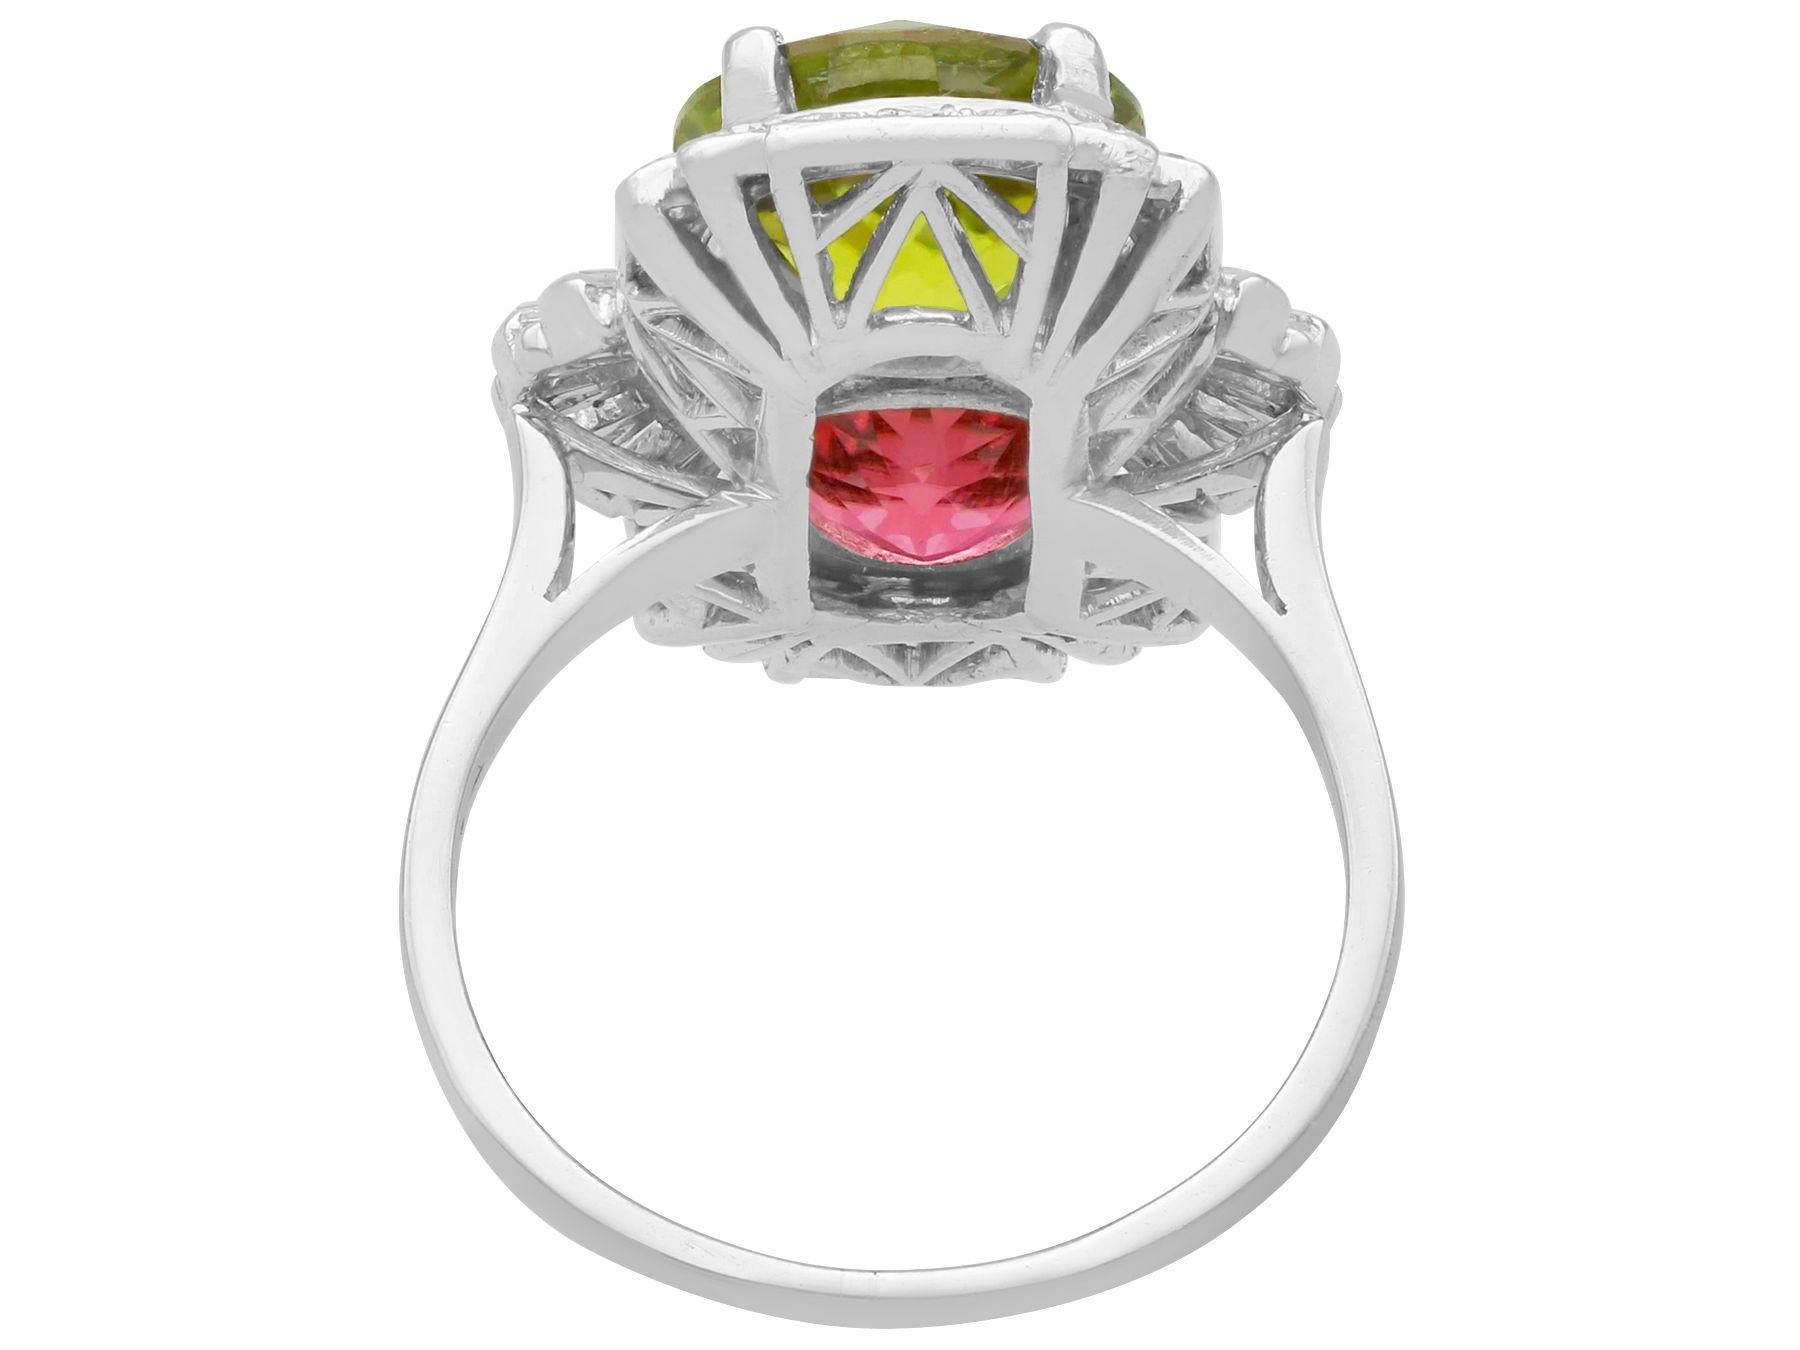 Vintage Art Deco 3.04ct Peridot 3.12ct Pink Tourmaline Diamond Platinum  Ring In Excellent Condition For Sale In Jesmond, Newcastle Upon Tyne